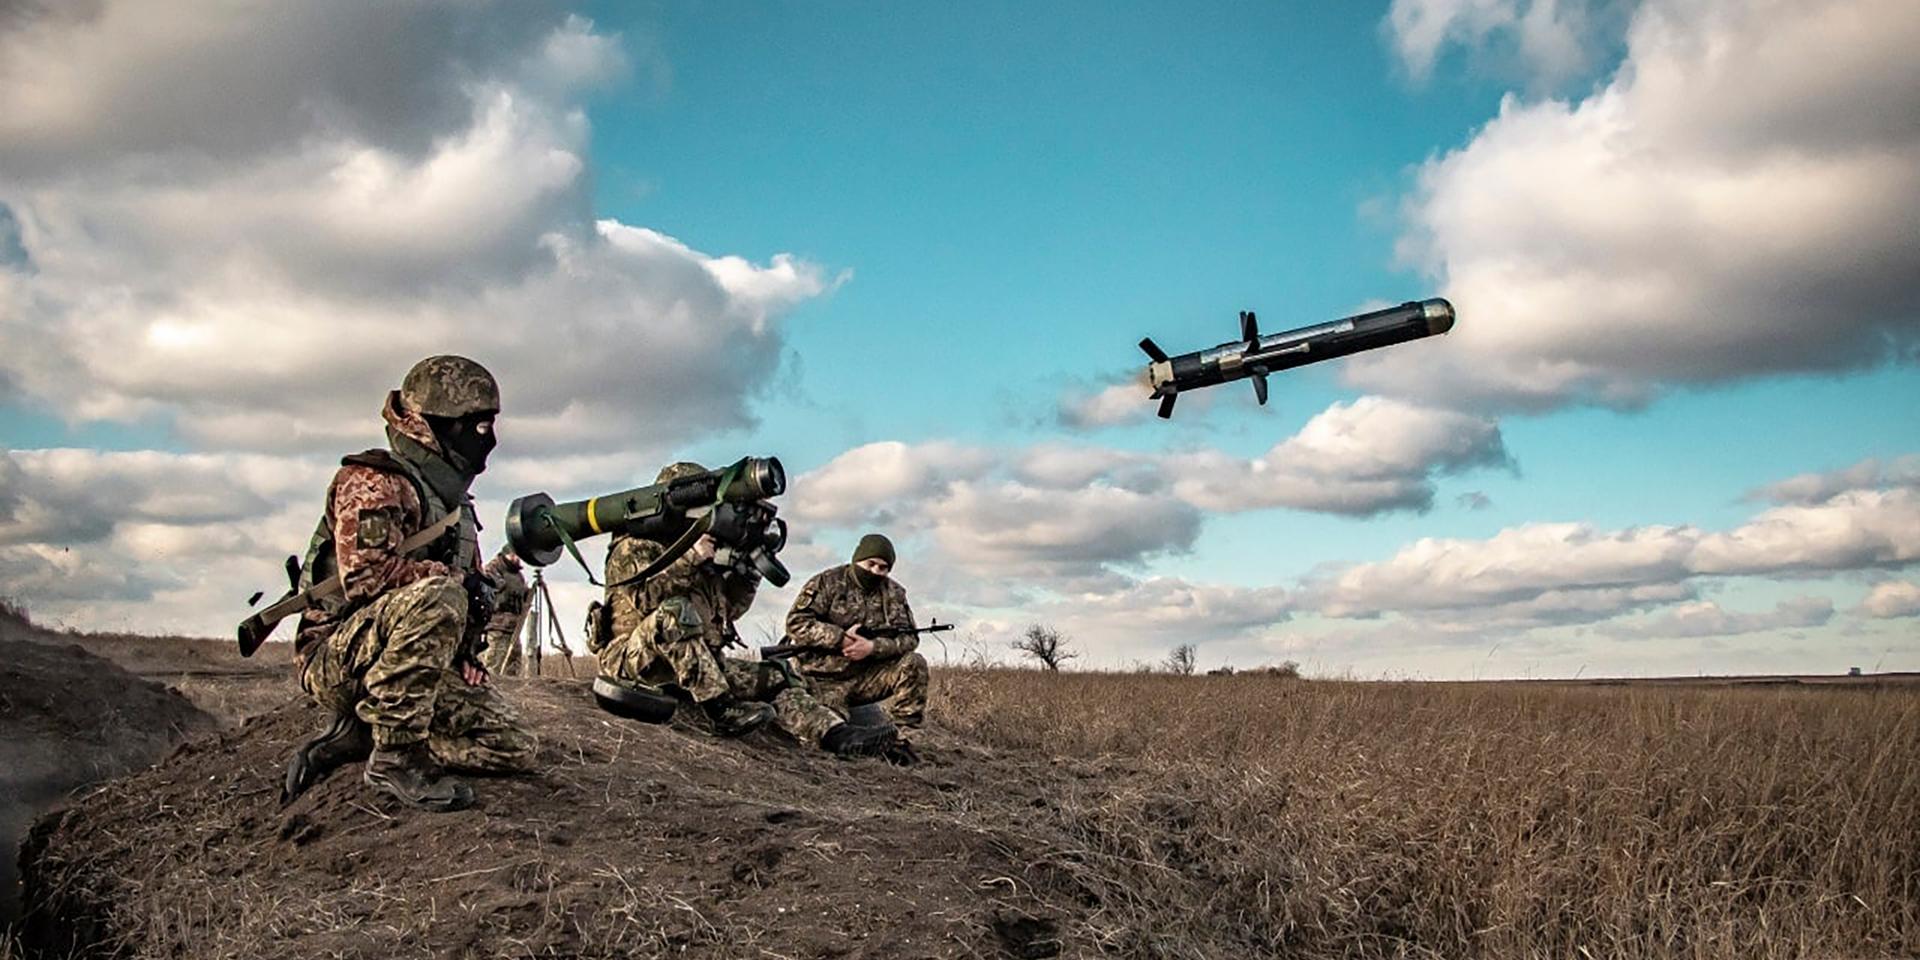 In this image released by Ukrainian Defense Ministry Press Service, Ukrainian soldiers use a launcher with US Javelin missiles during military exercises in Donetsk region, Ukraine, Thursday, Dec. 23, 2021. (Ukrainian Defense Ministry Press Service via AP)  XEL104